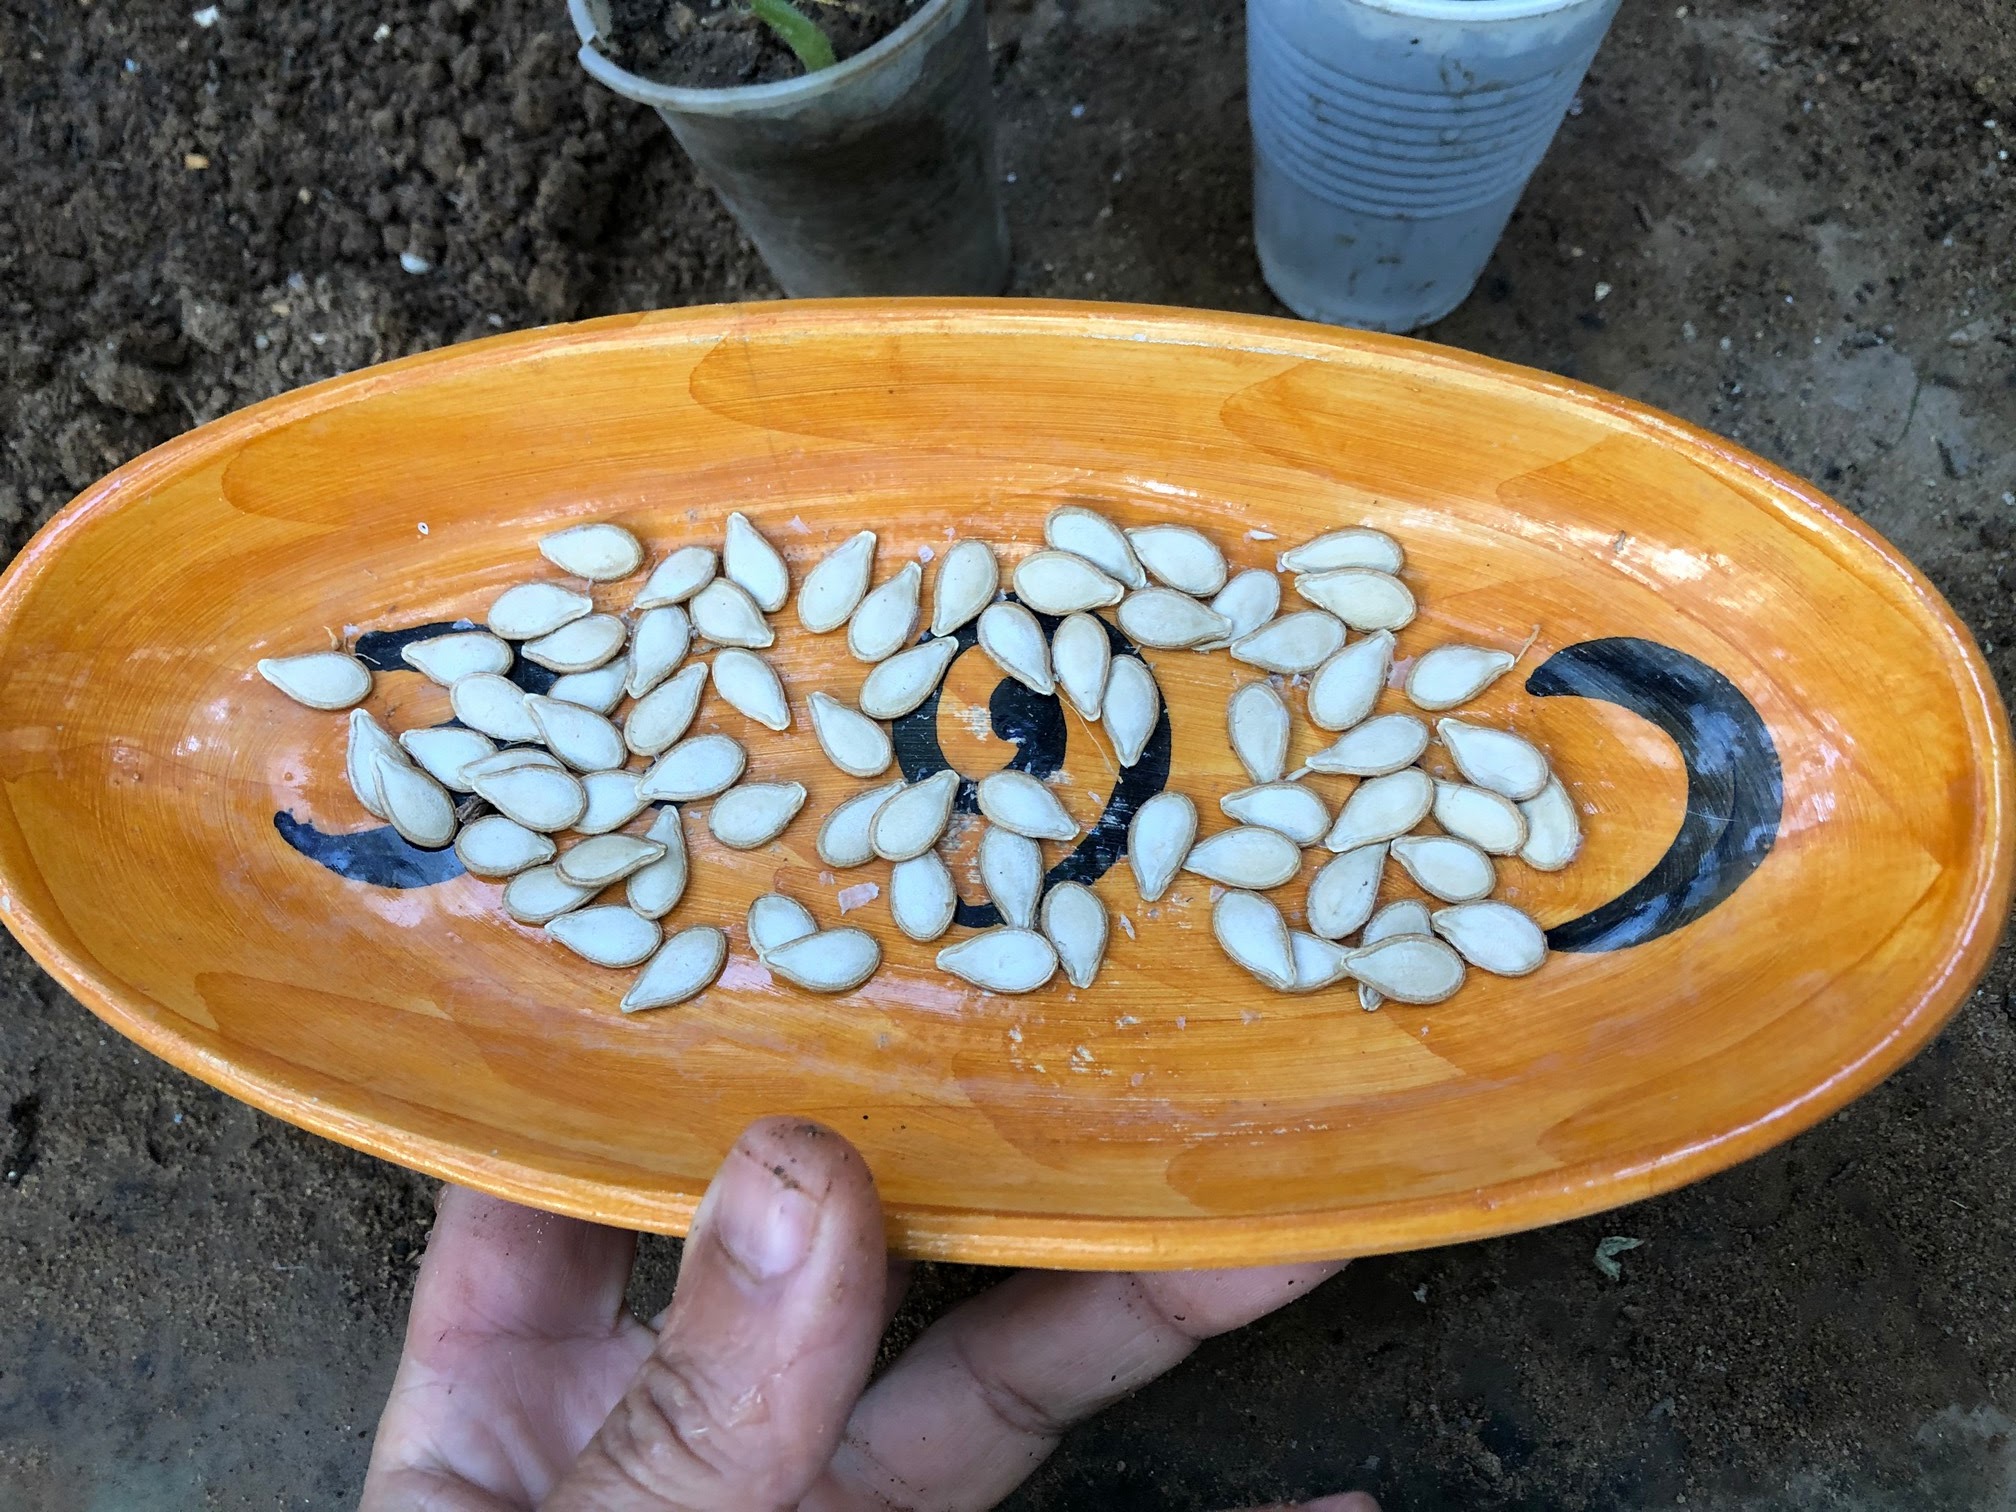 When gathering zucchini seeds for indoor germination, it's important to select zucchini seeds from trusted suppliers or sources recognized for their top-notch seeds.